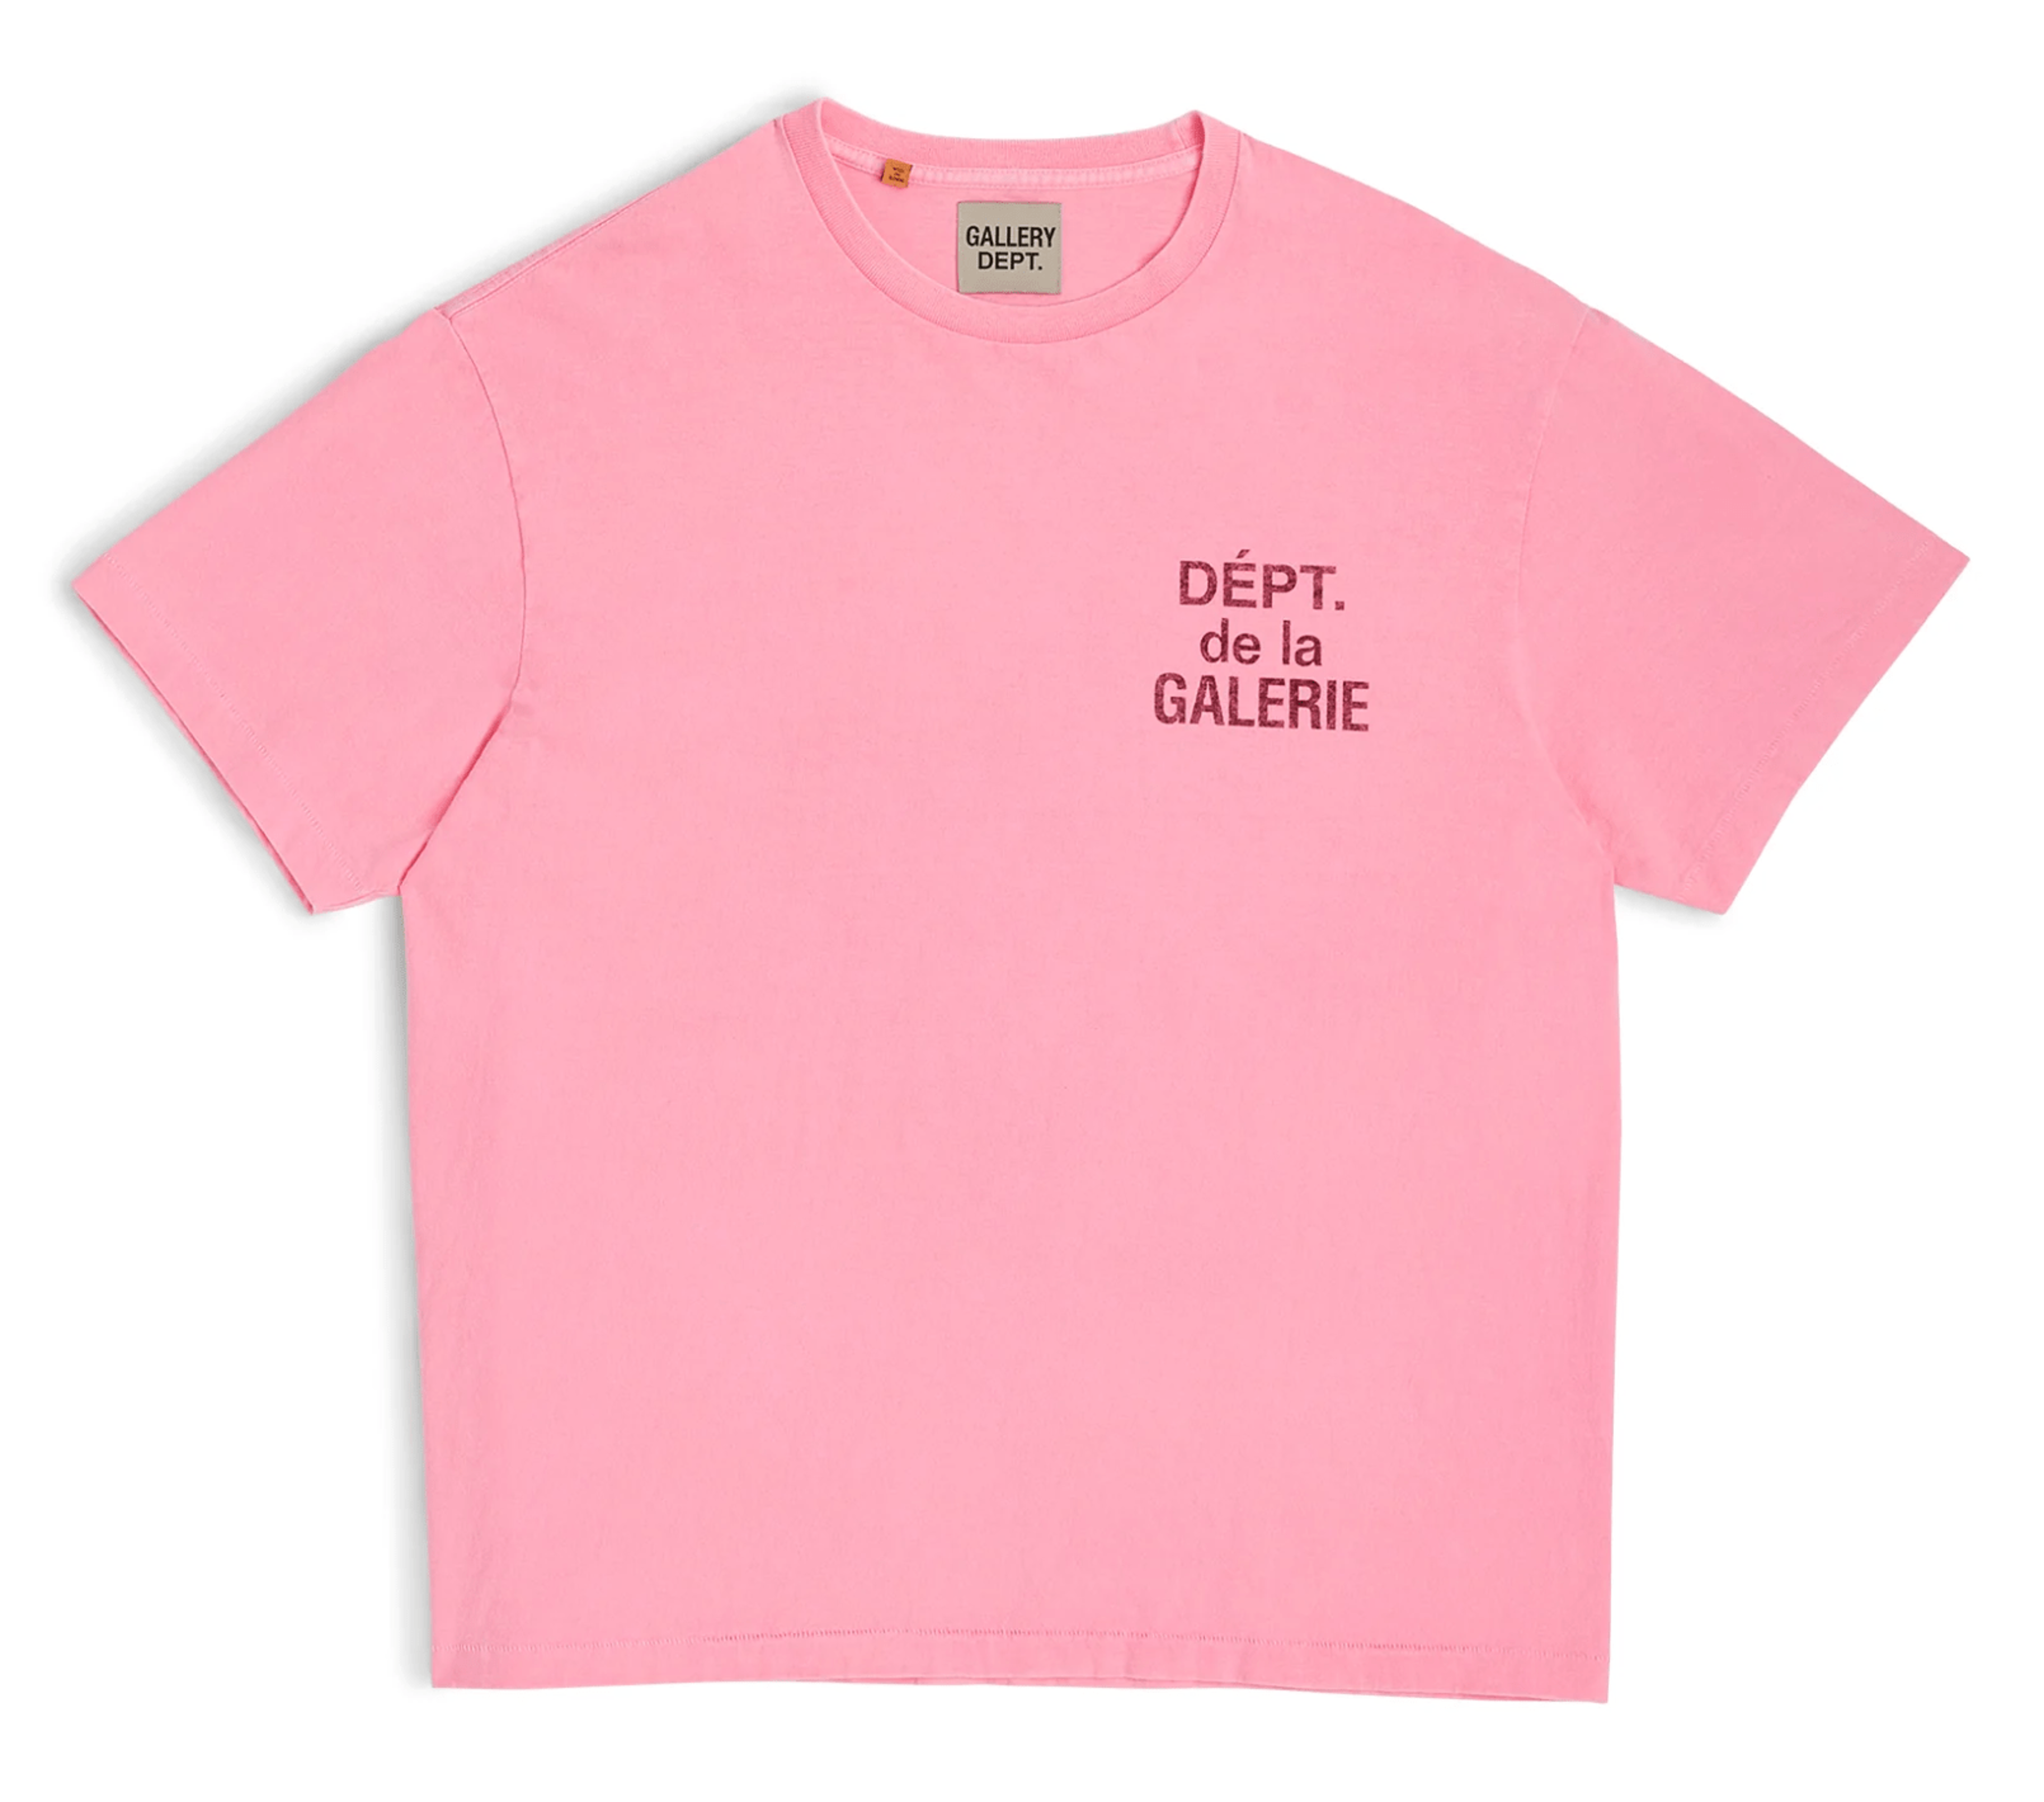 Alternate View 1 of Gallery Department French Logo Short Sleeve Tee Shirt Flo Pink